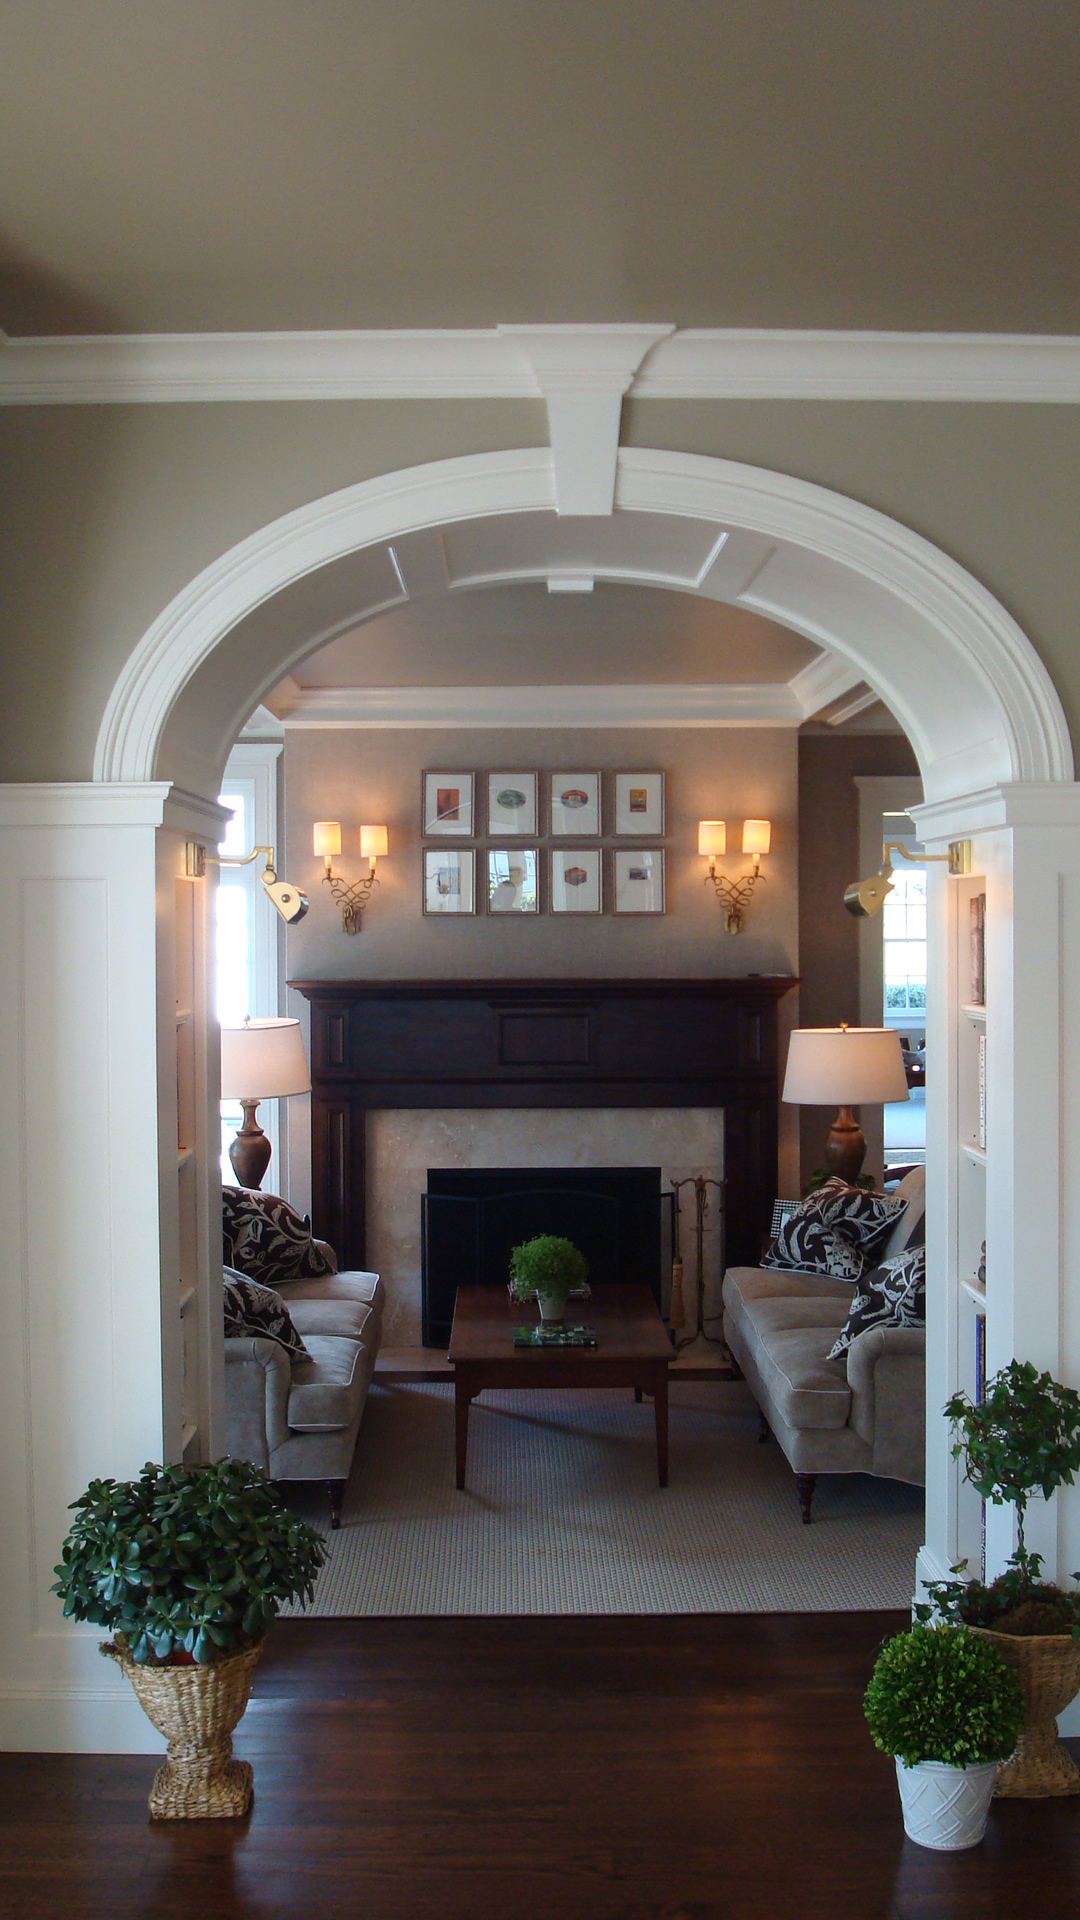 Renovation-colonial-arched-doorway-old-greenwich-ct-interior-w.jpg